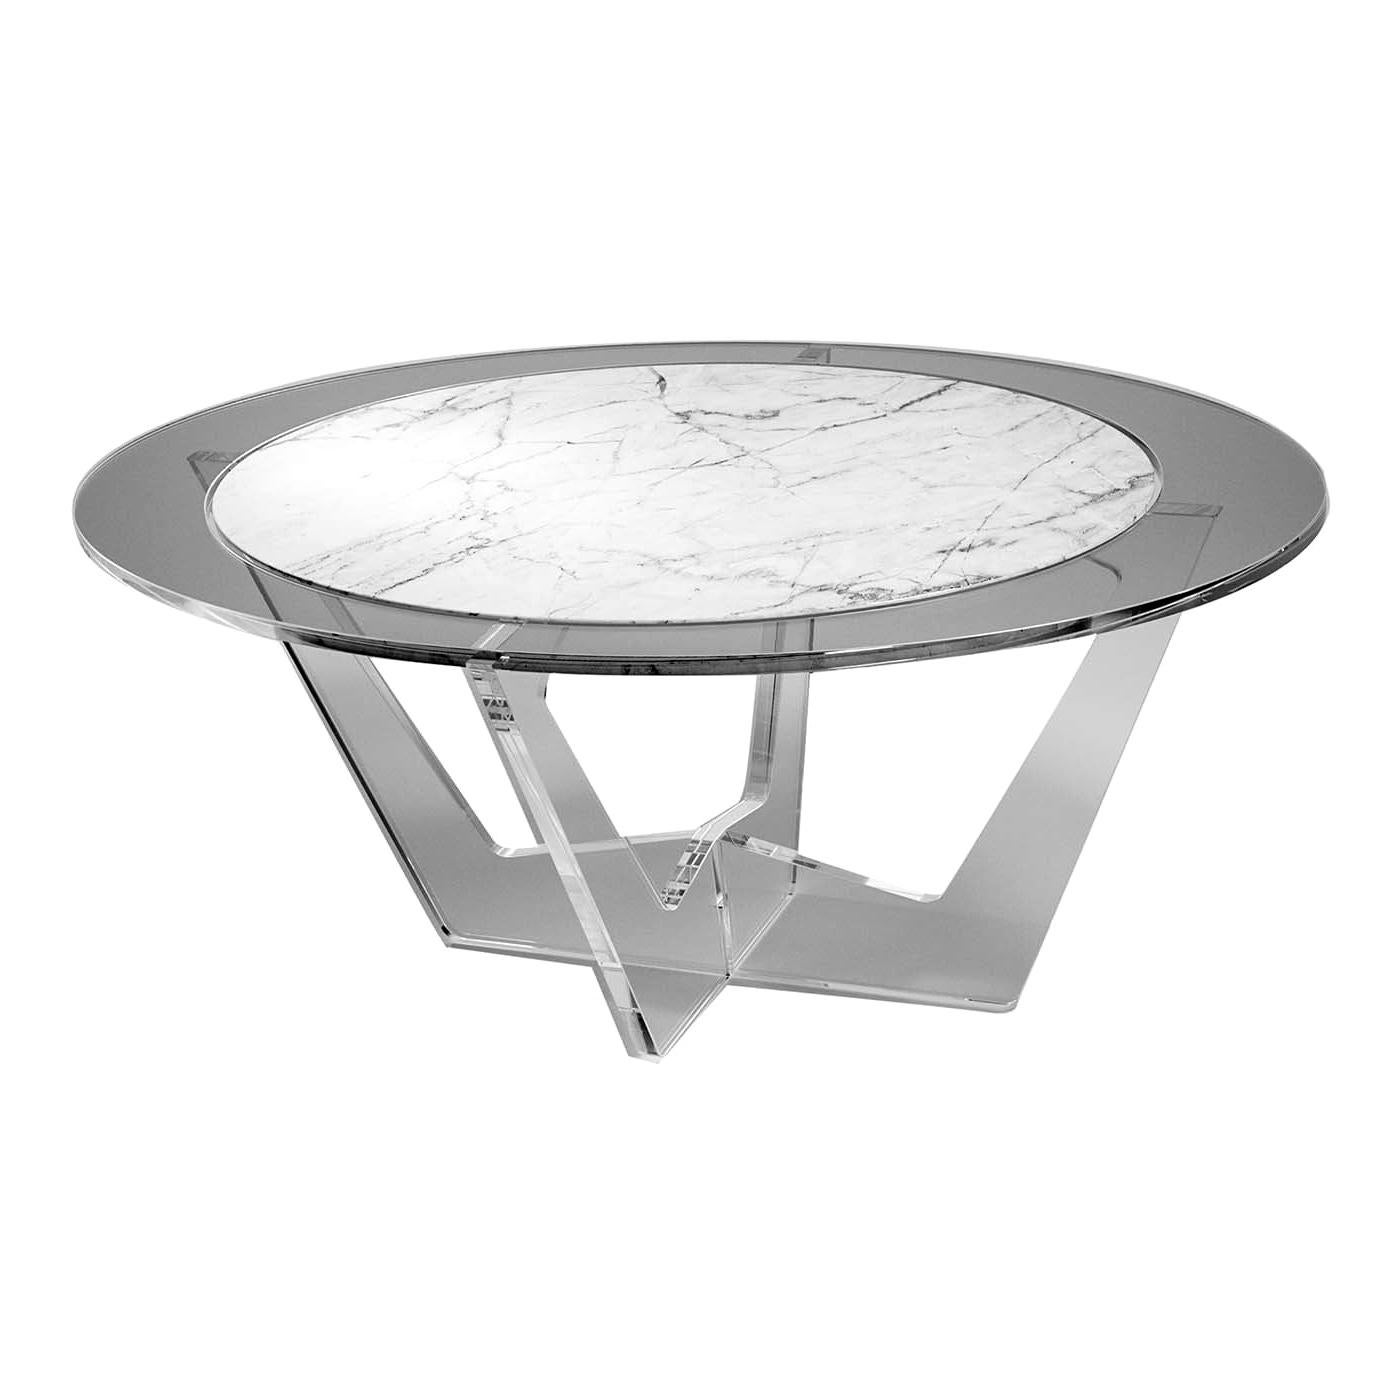 Hac Gray Oval Coffee Table with White Carrara Marble Top by Madea Milano